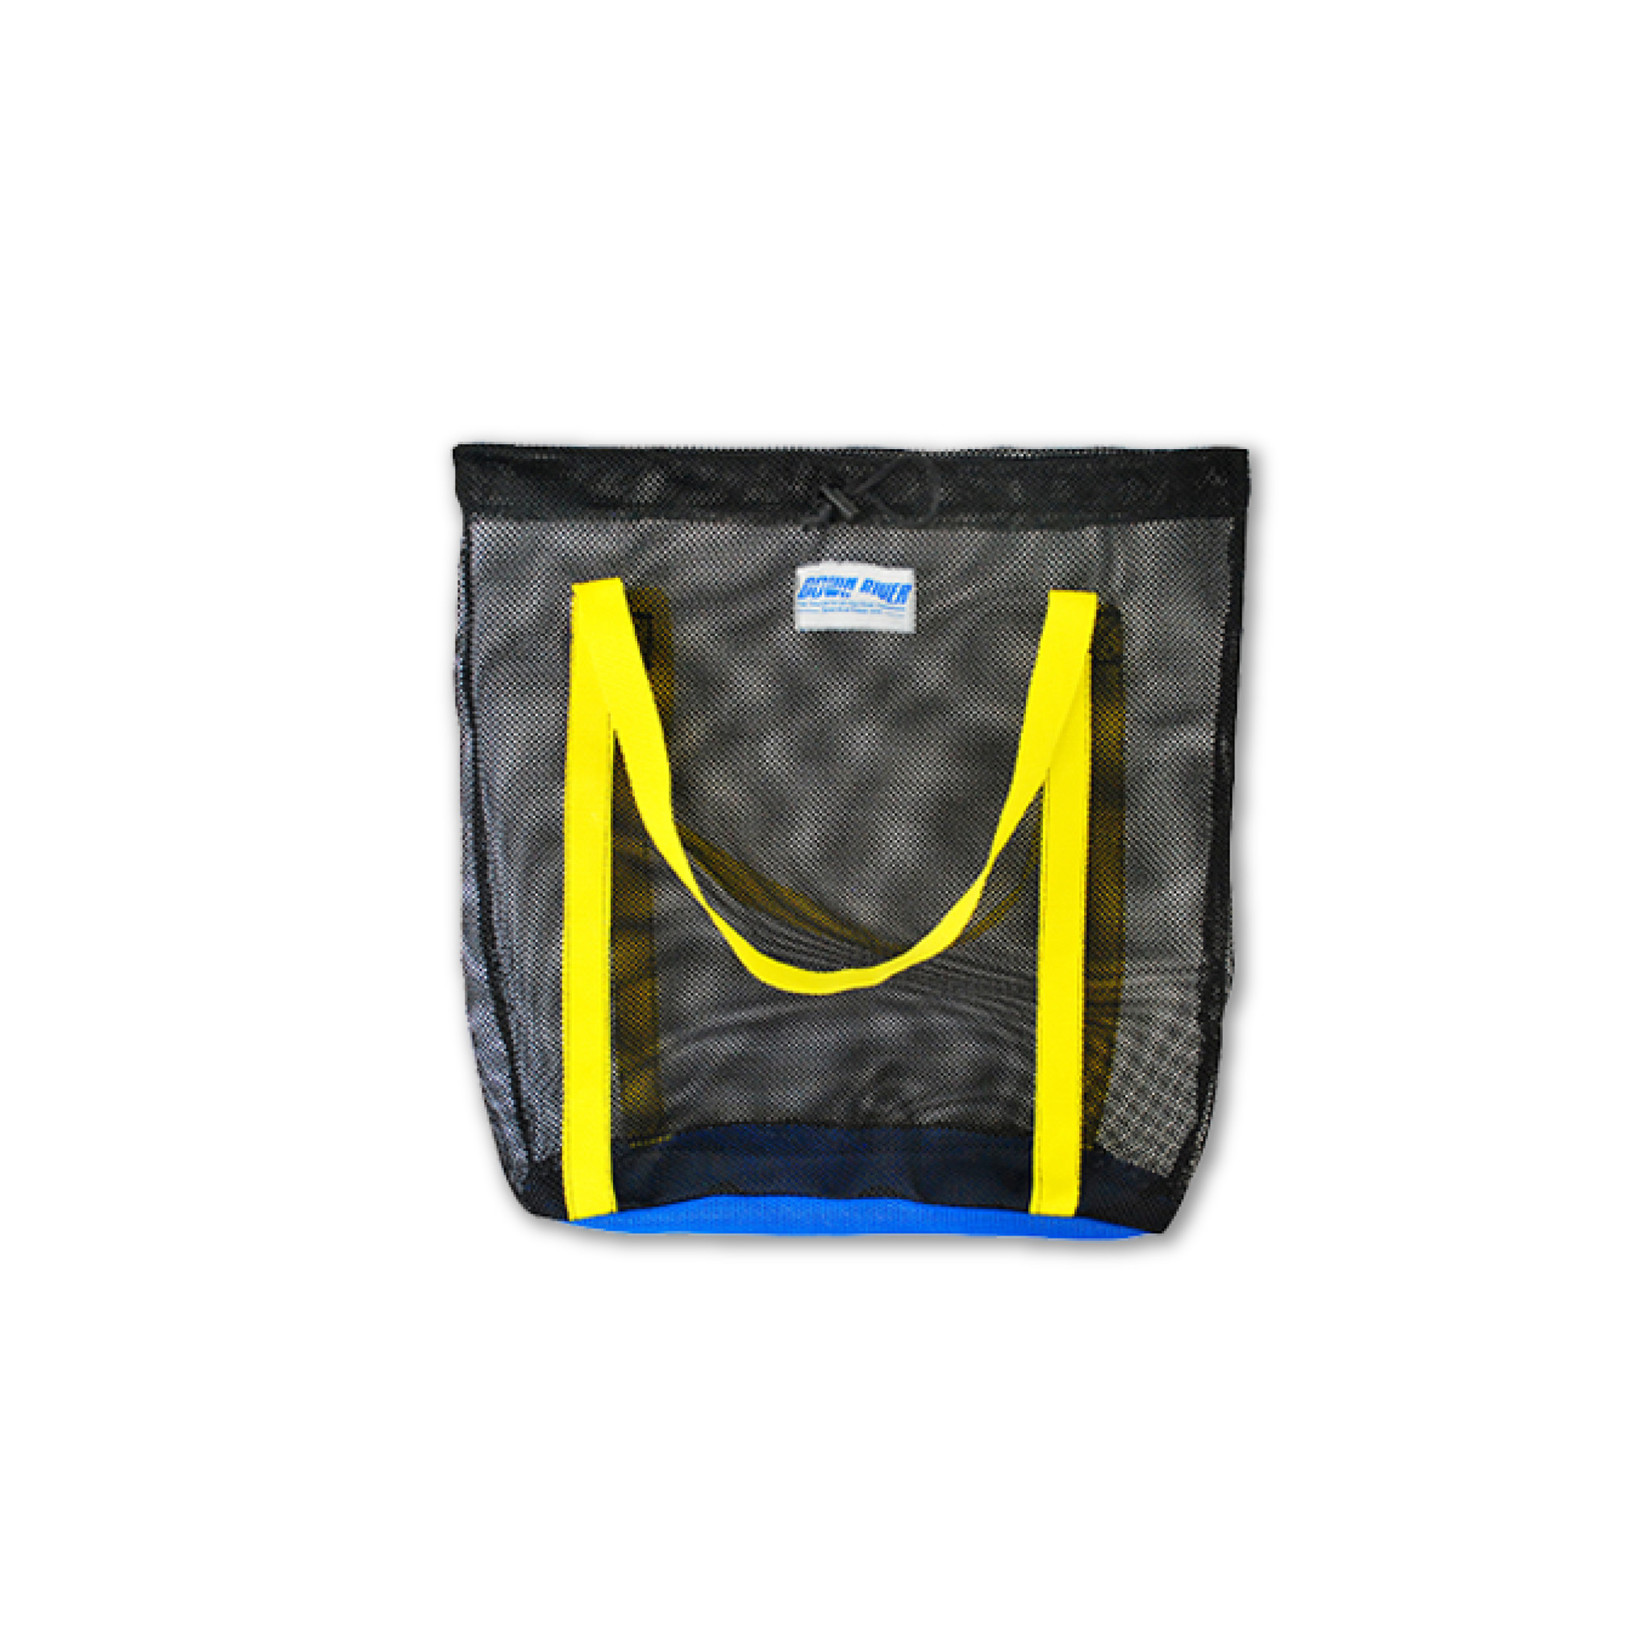 Down River Equipment Down River Deluxe Mesh Bag-Small